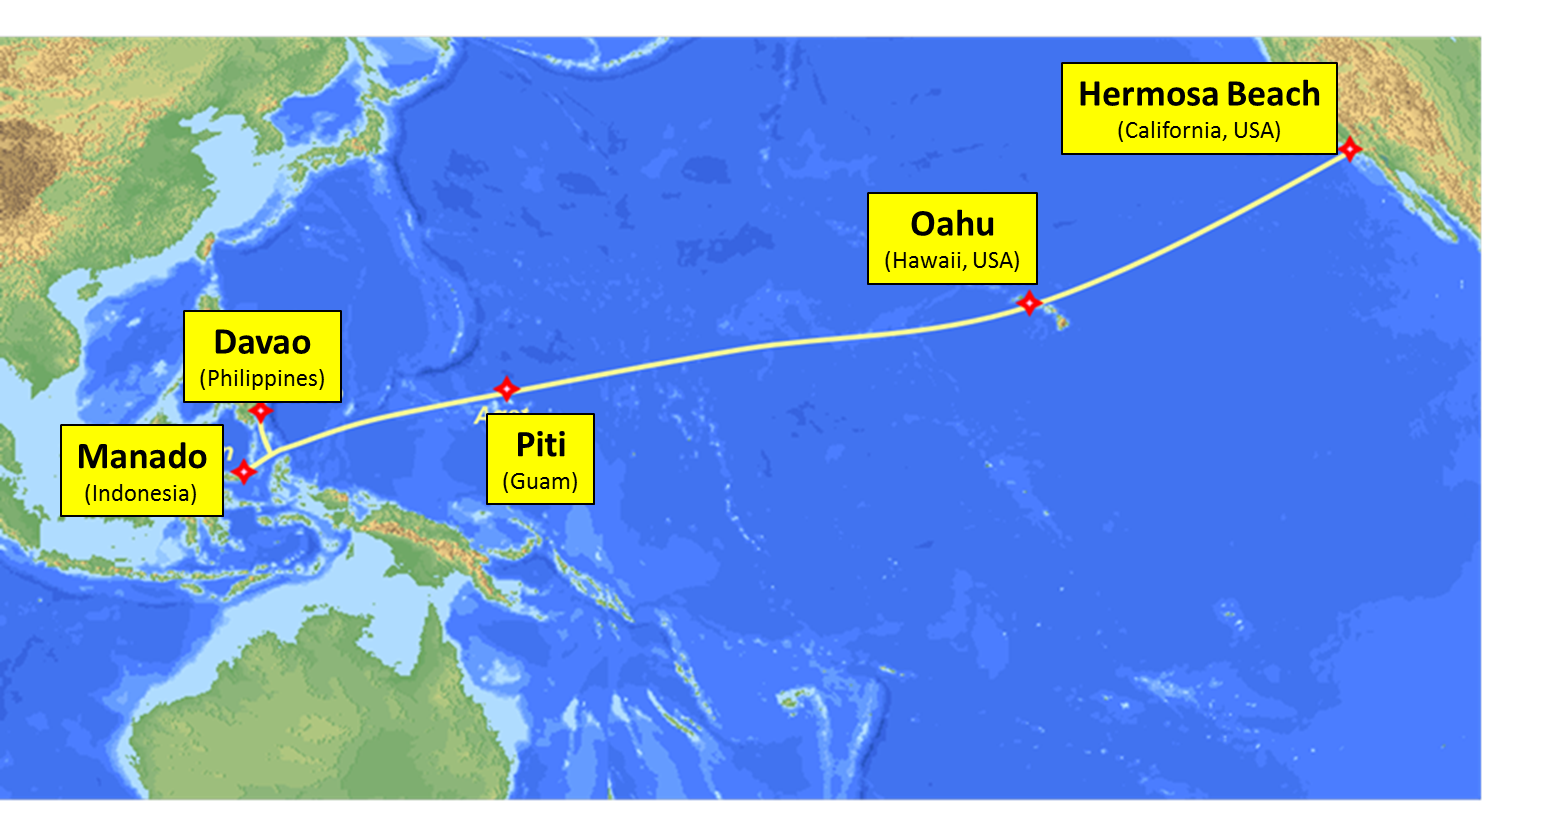 The SEA-US Trans-Pacific Submarine Cable System Route